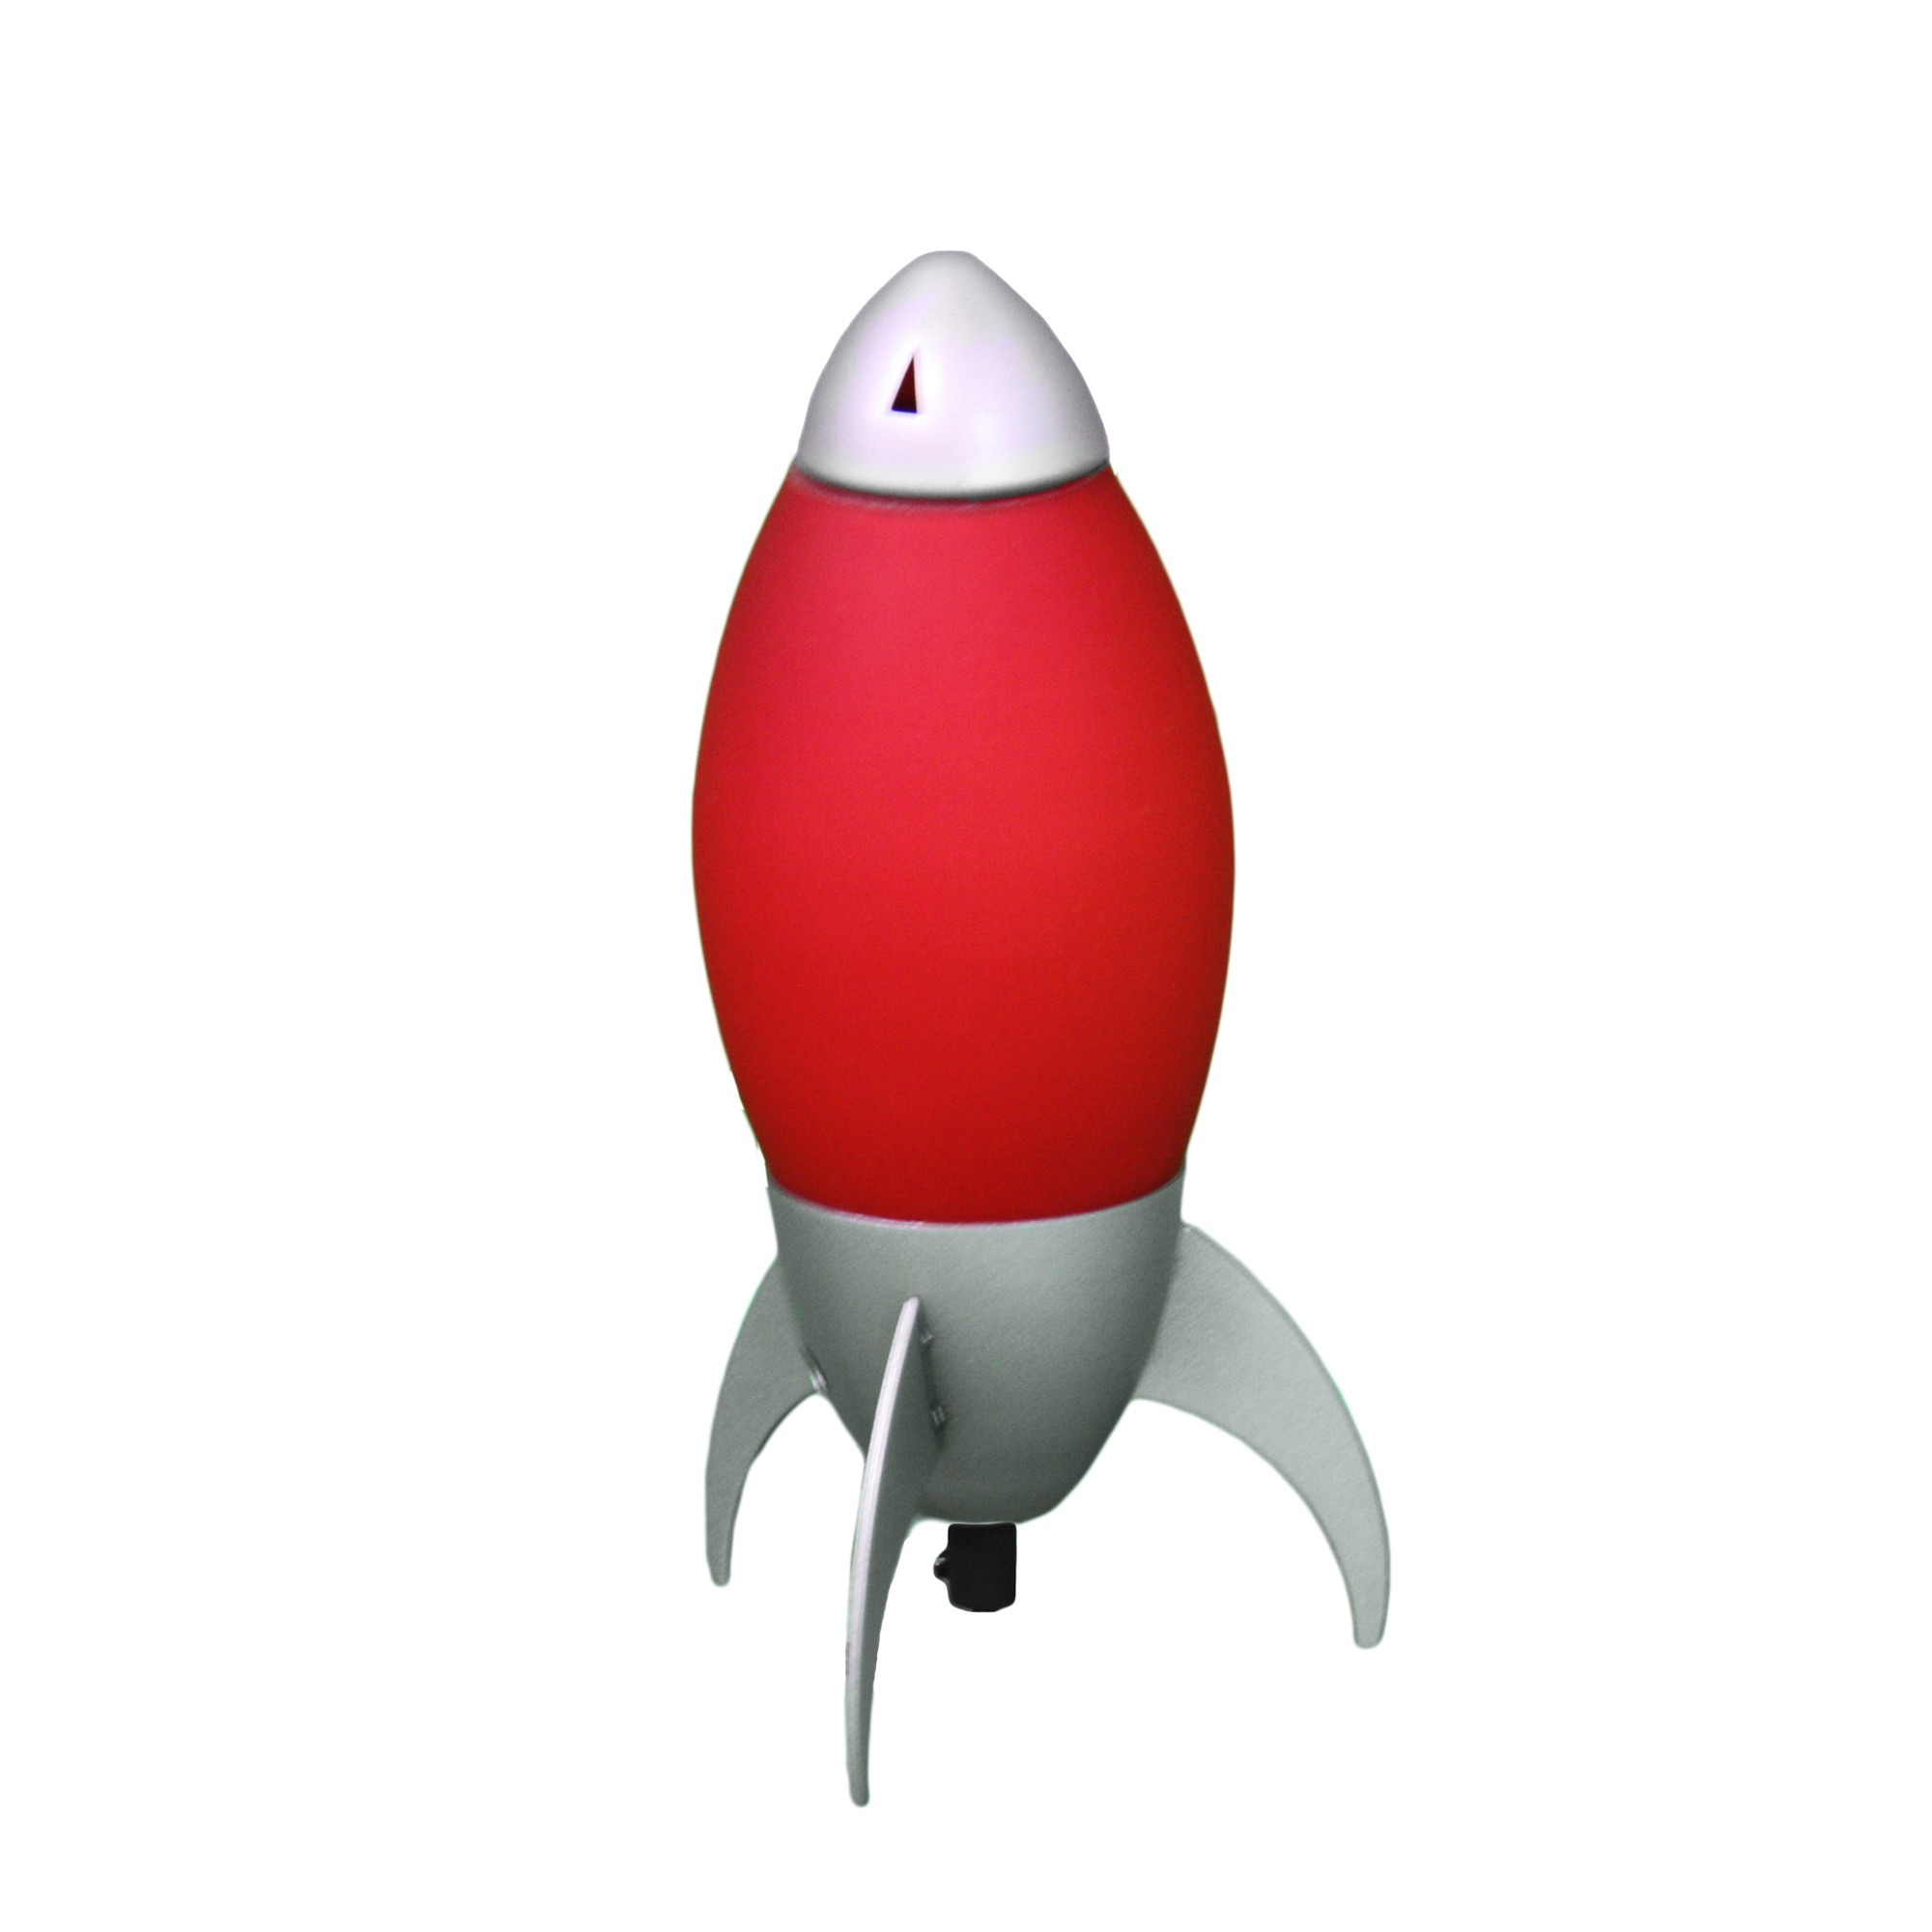 Red and Silver Rocket Shaped Table Lamp